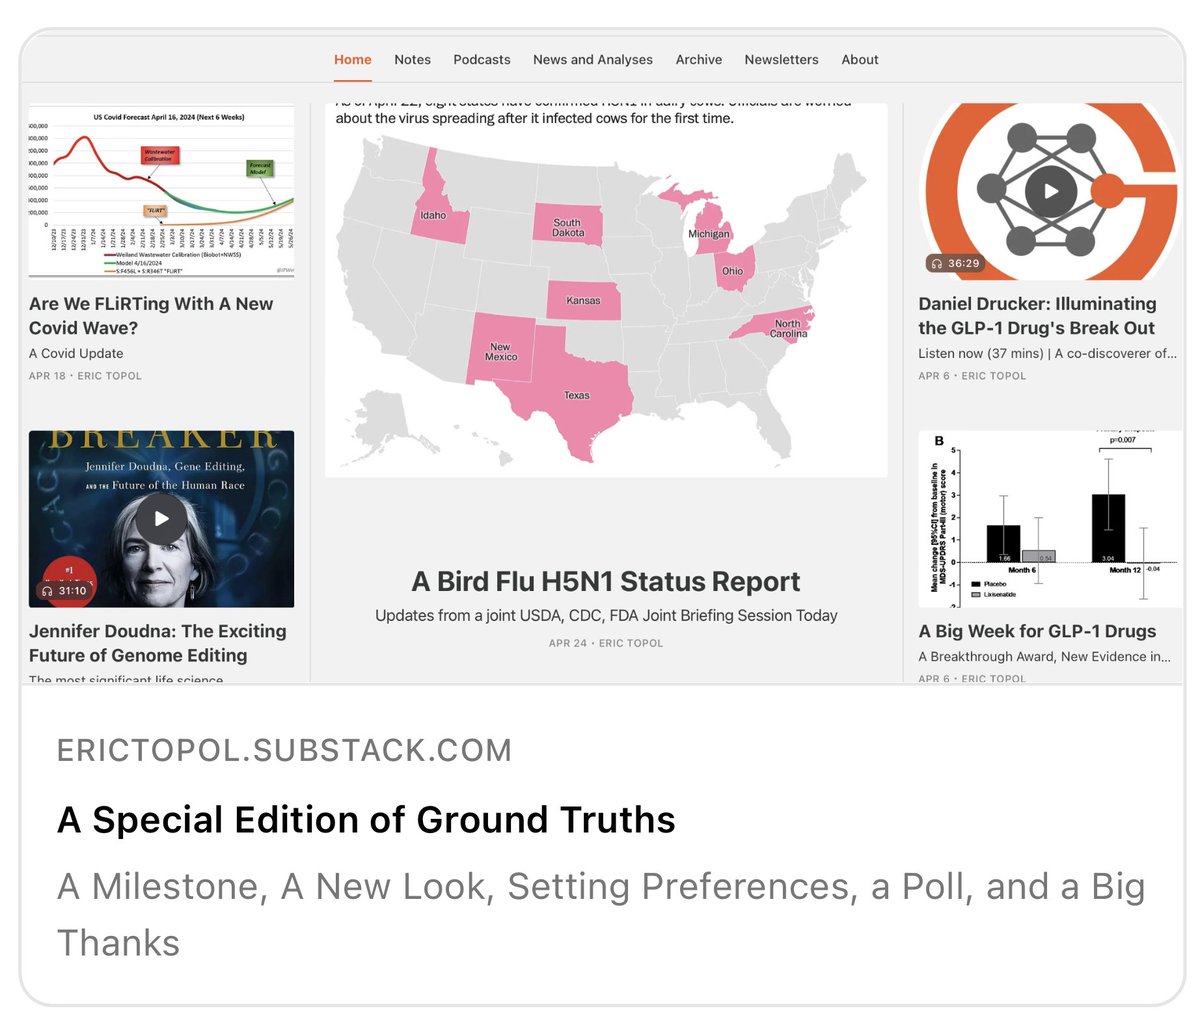 A special edition of Ground Truths My effort to get solid, relevant biomedical information out there. It's all free, without ads. Link in profile.